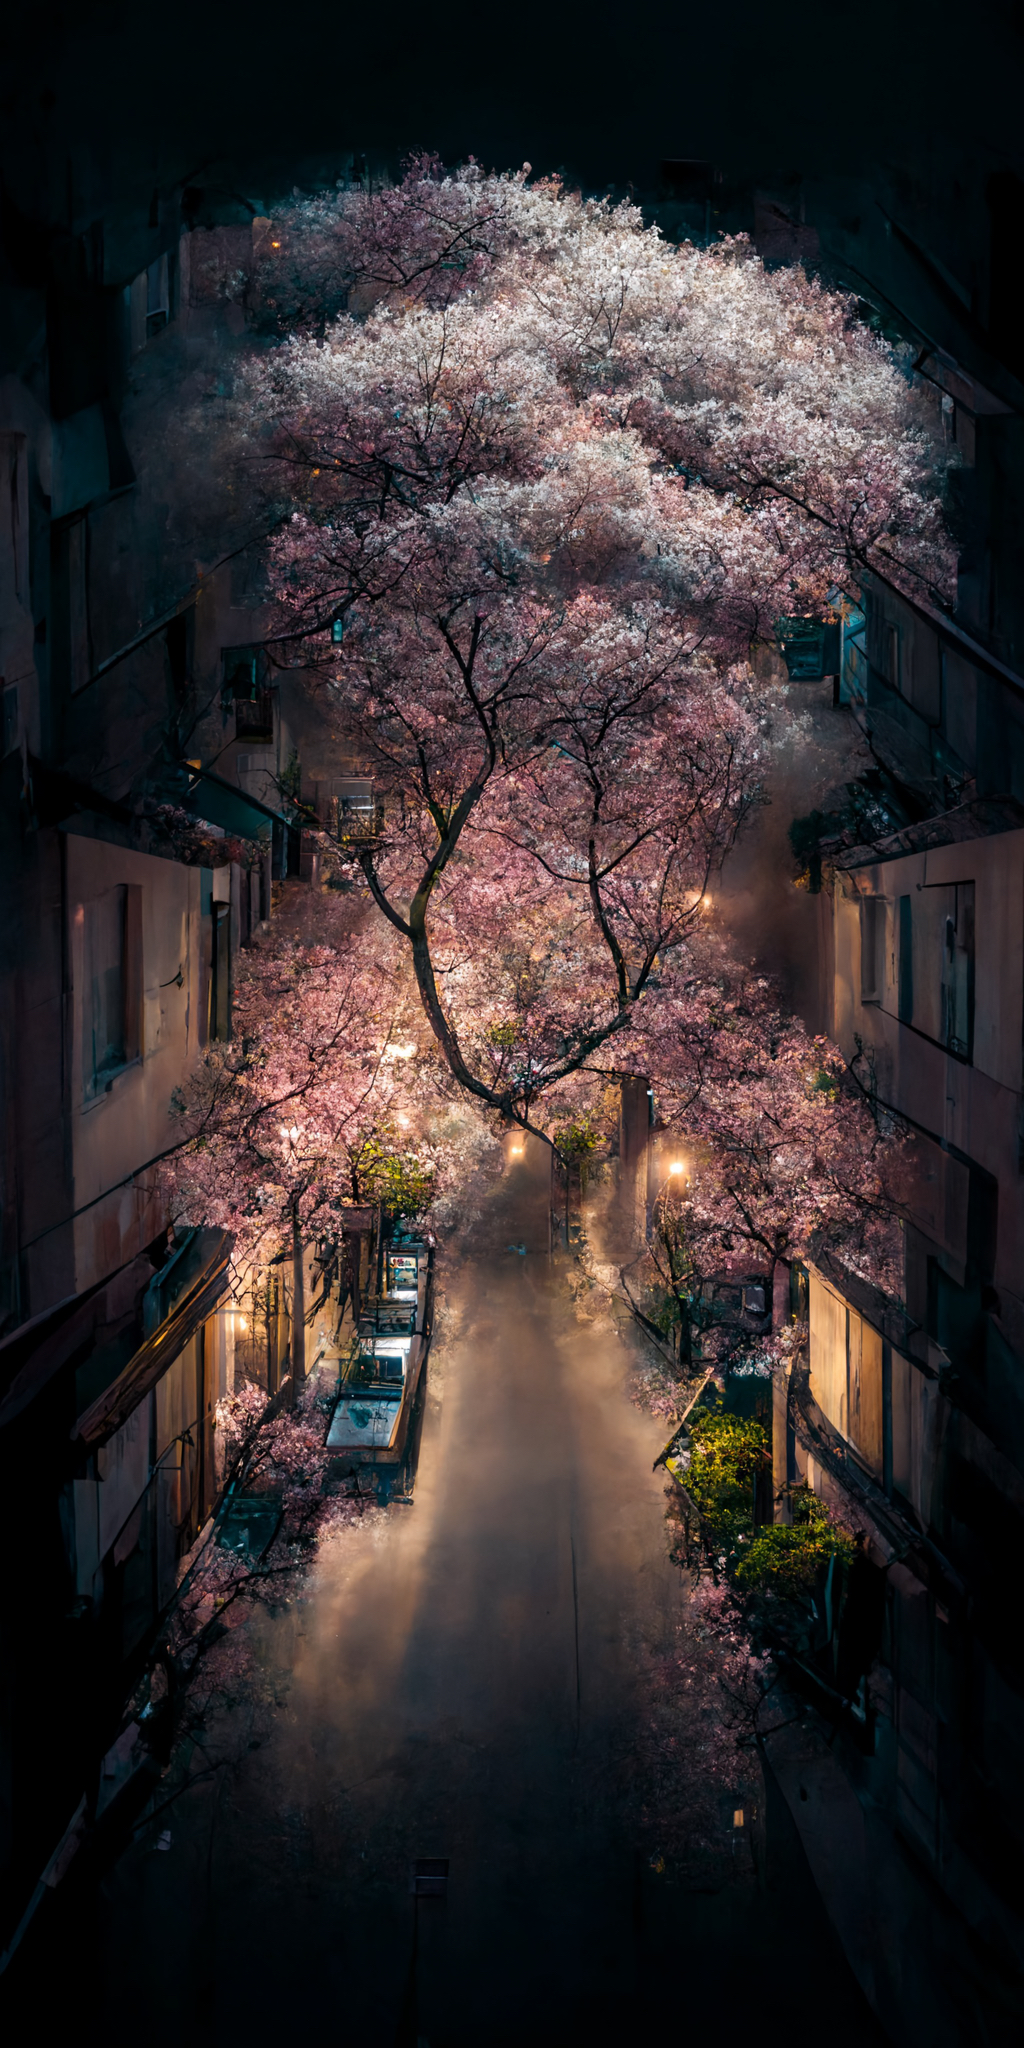 Bluewing_an_alley_in_Tokyo_with_cherry_blossoms_Sony_a7_III_Top_a001784c-133a-4910-85bf-a32d9a7afbea.jpeg